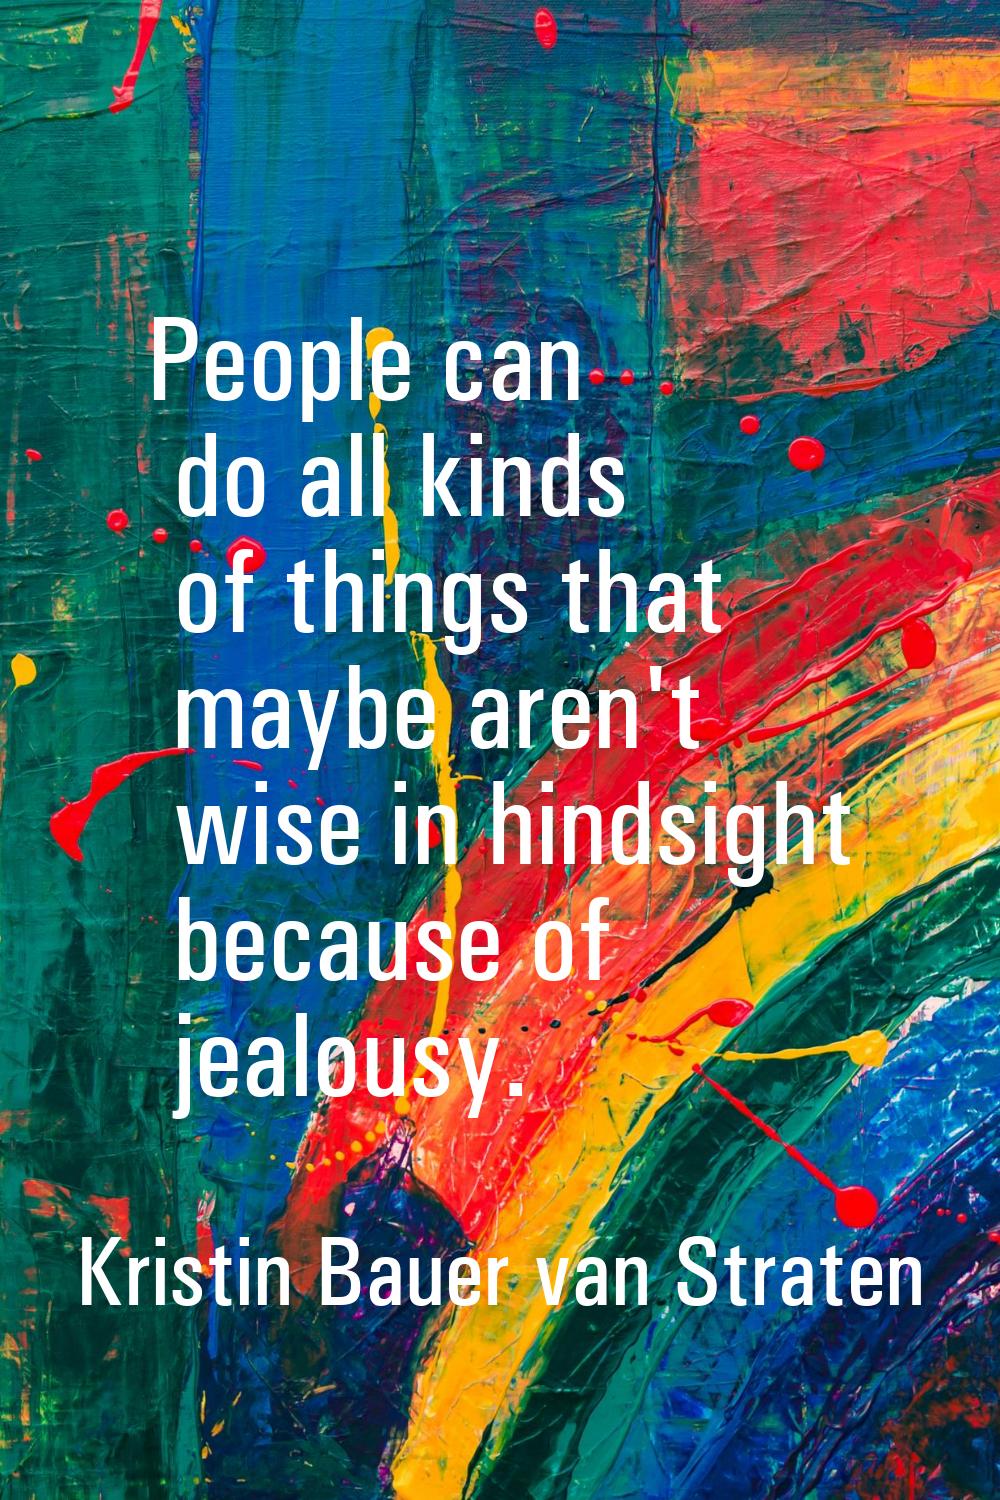 People can do all kinds of things that maybe aren't wise in hindsight because of jealousy.